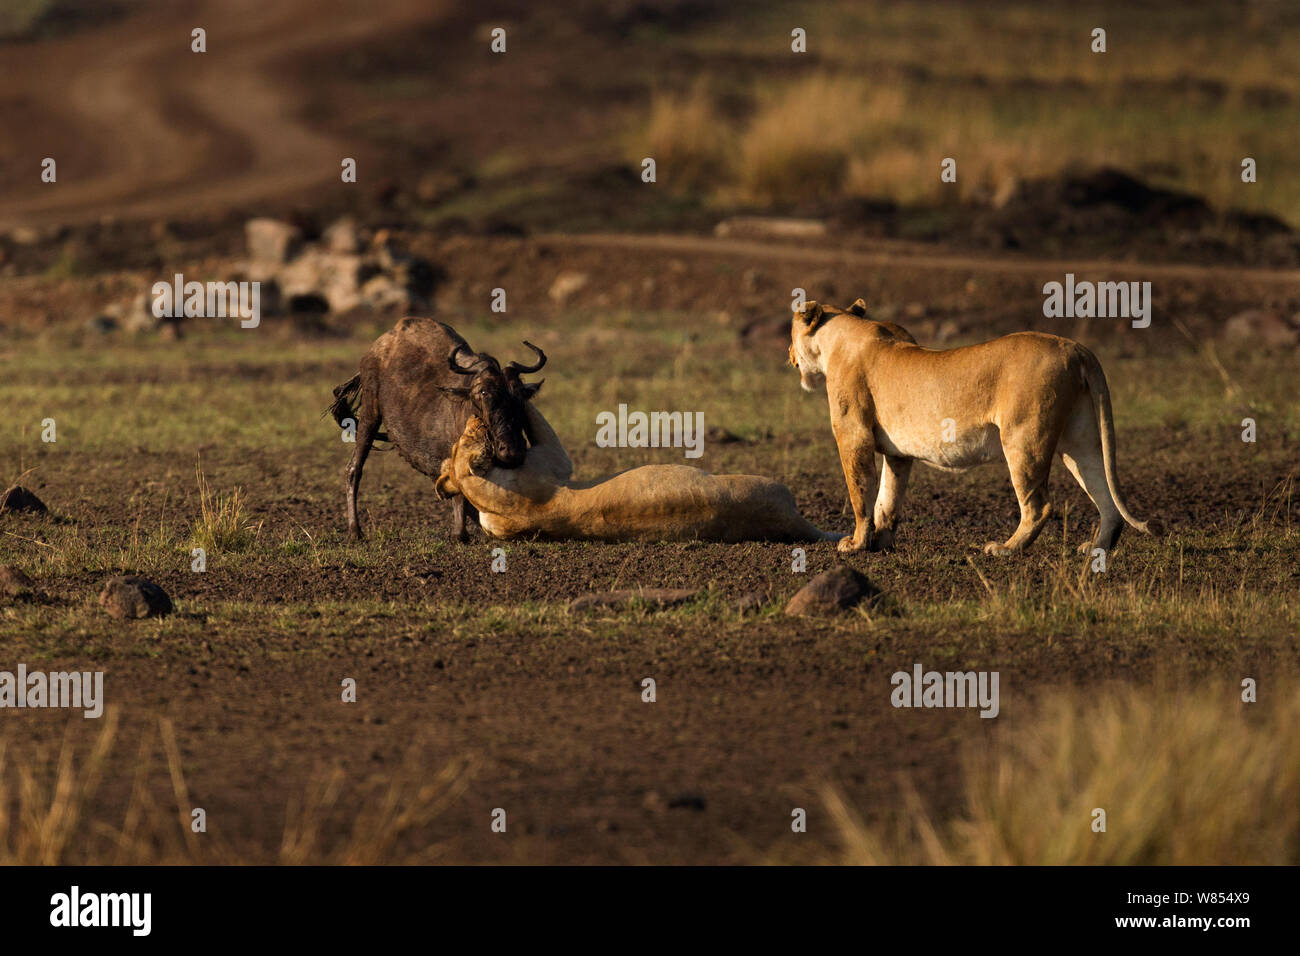 Eastern White bearded Wildebeest (Connochaetes taurinus) being attacked by Africa lions (Panthera leo) Masai Mara National Reserve, Kenya, September, sequence 3/12 Stock Photo